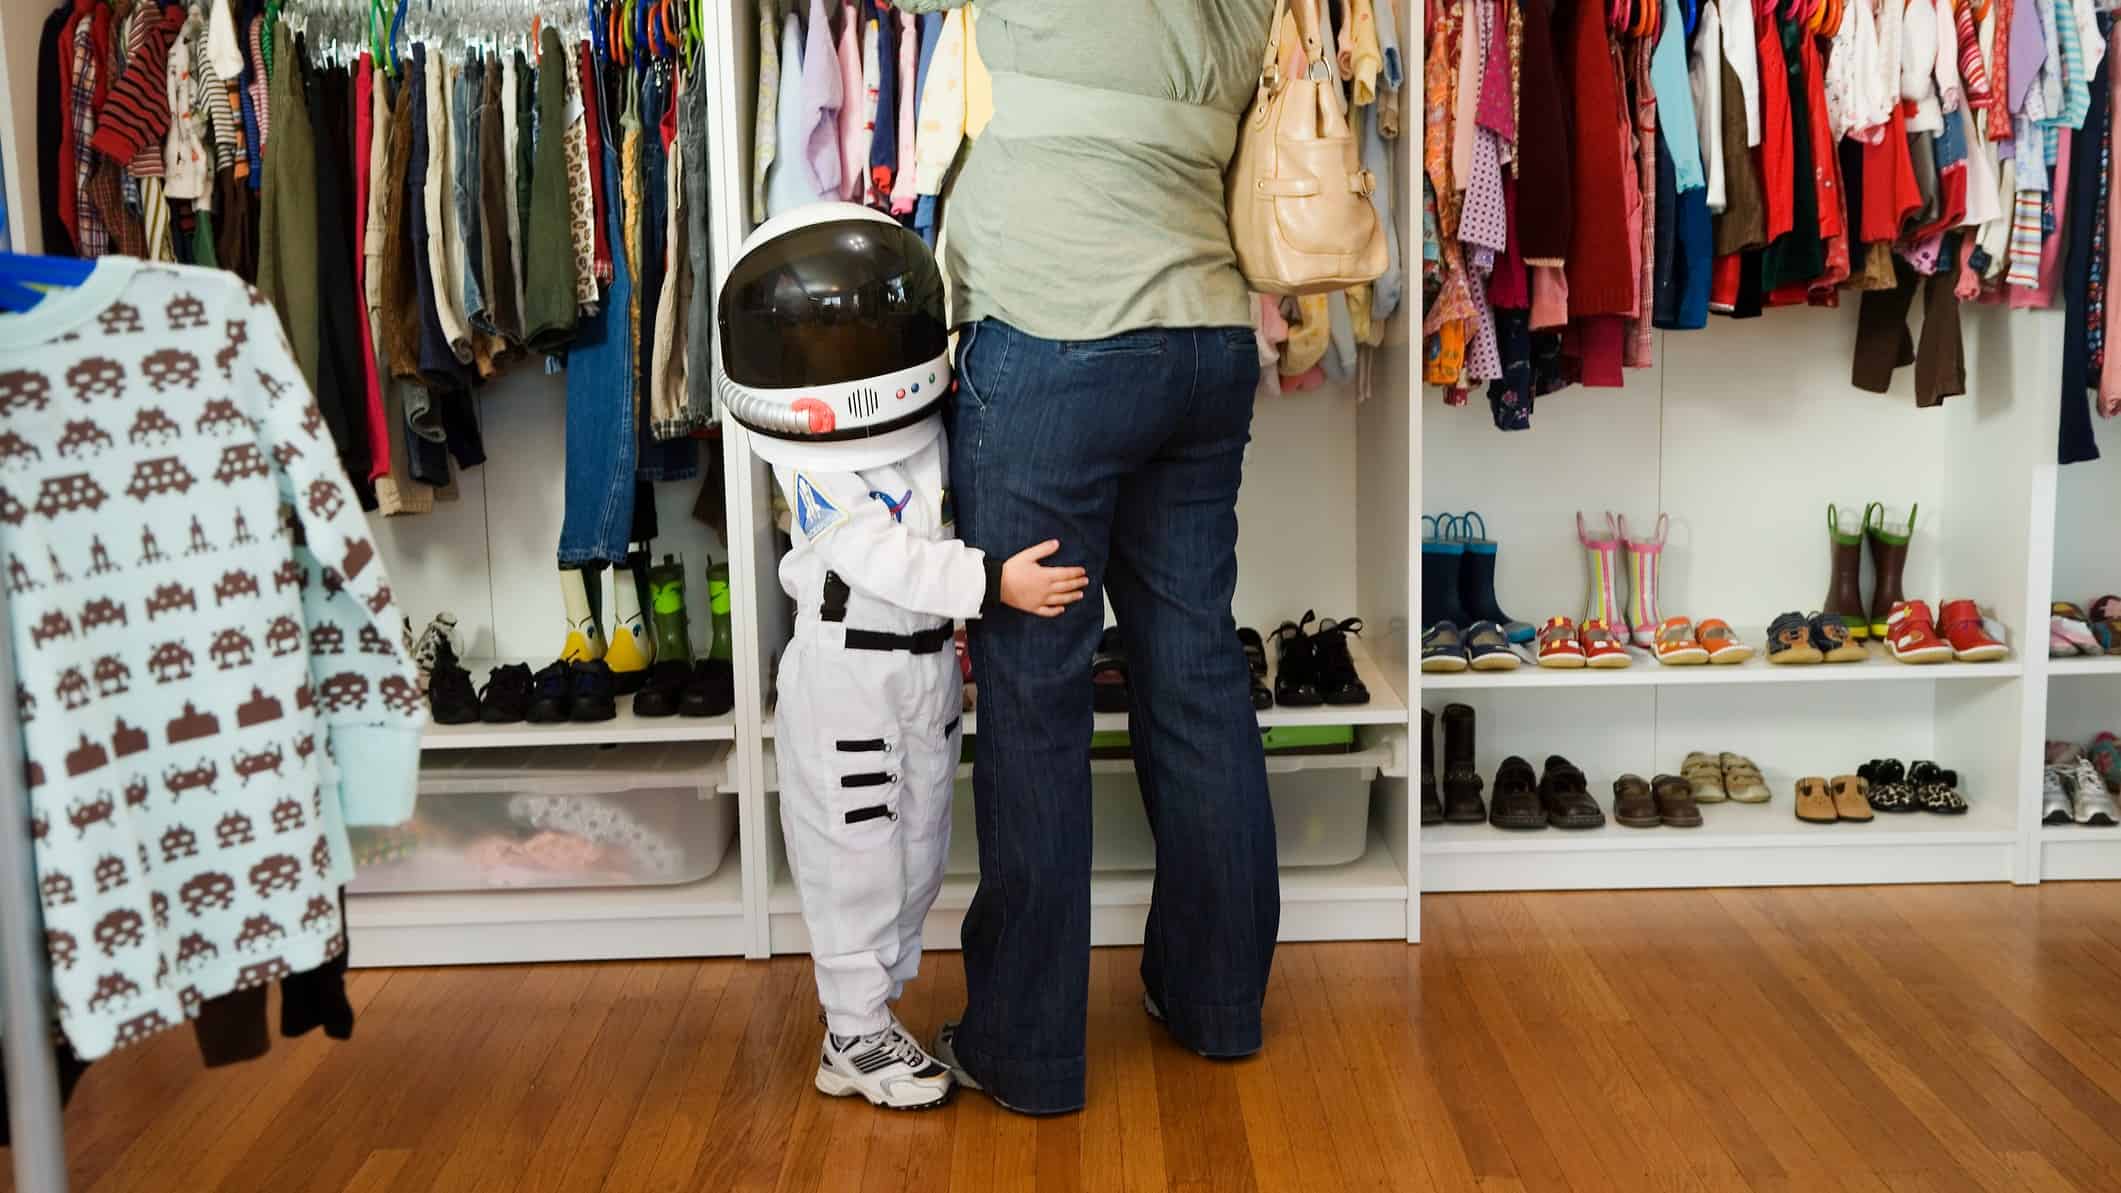 A child wearing an astronaut siut goes shopping with his mother